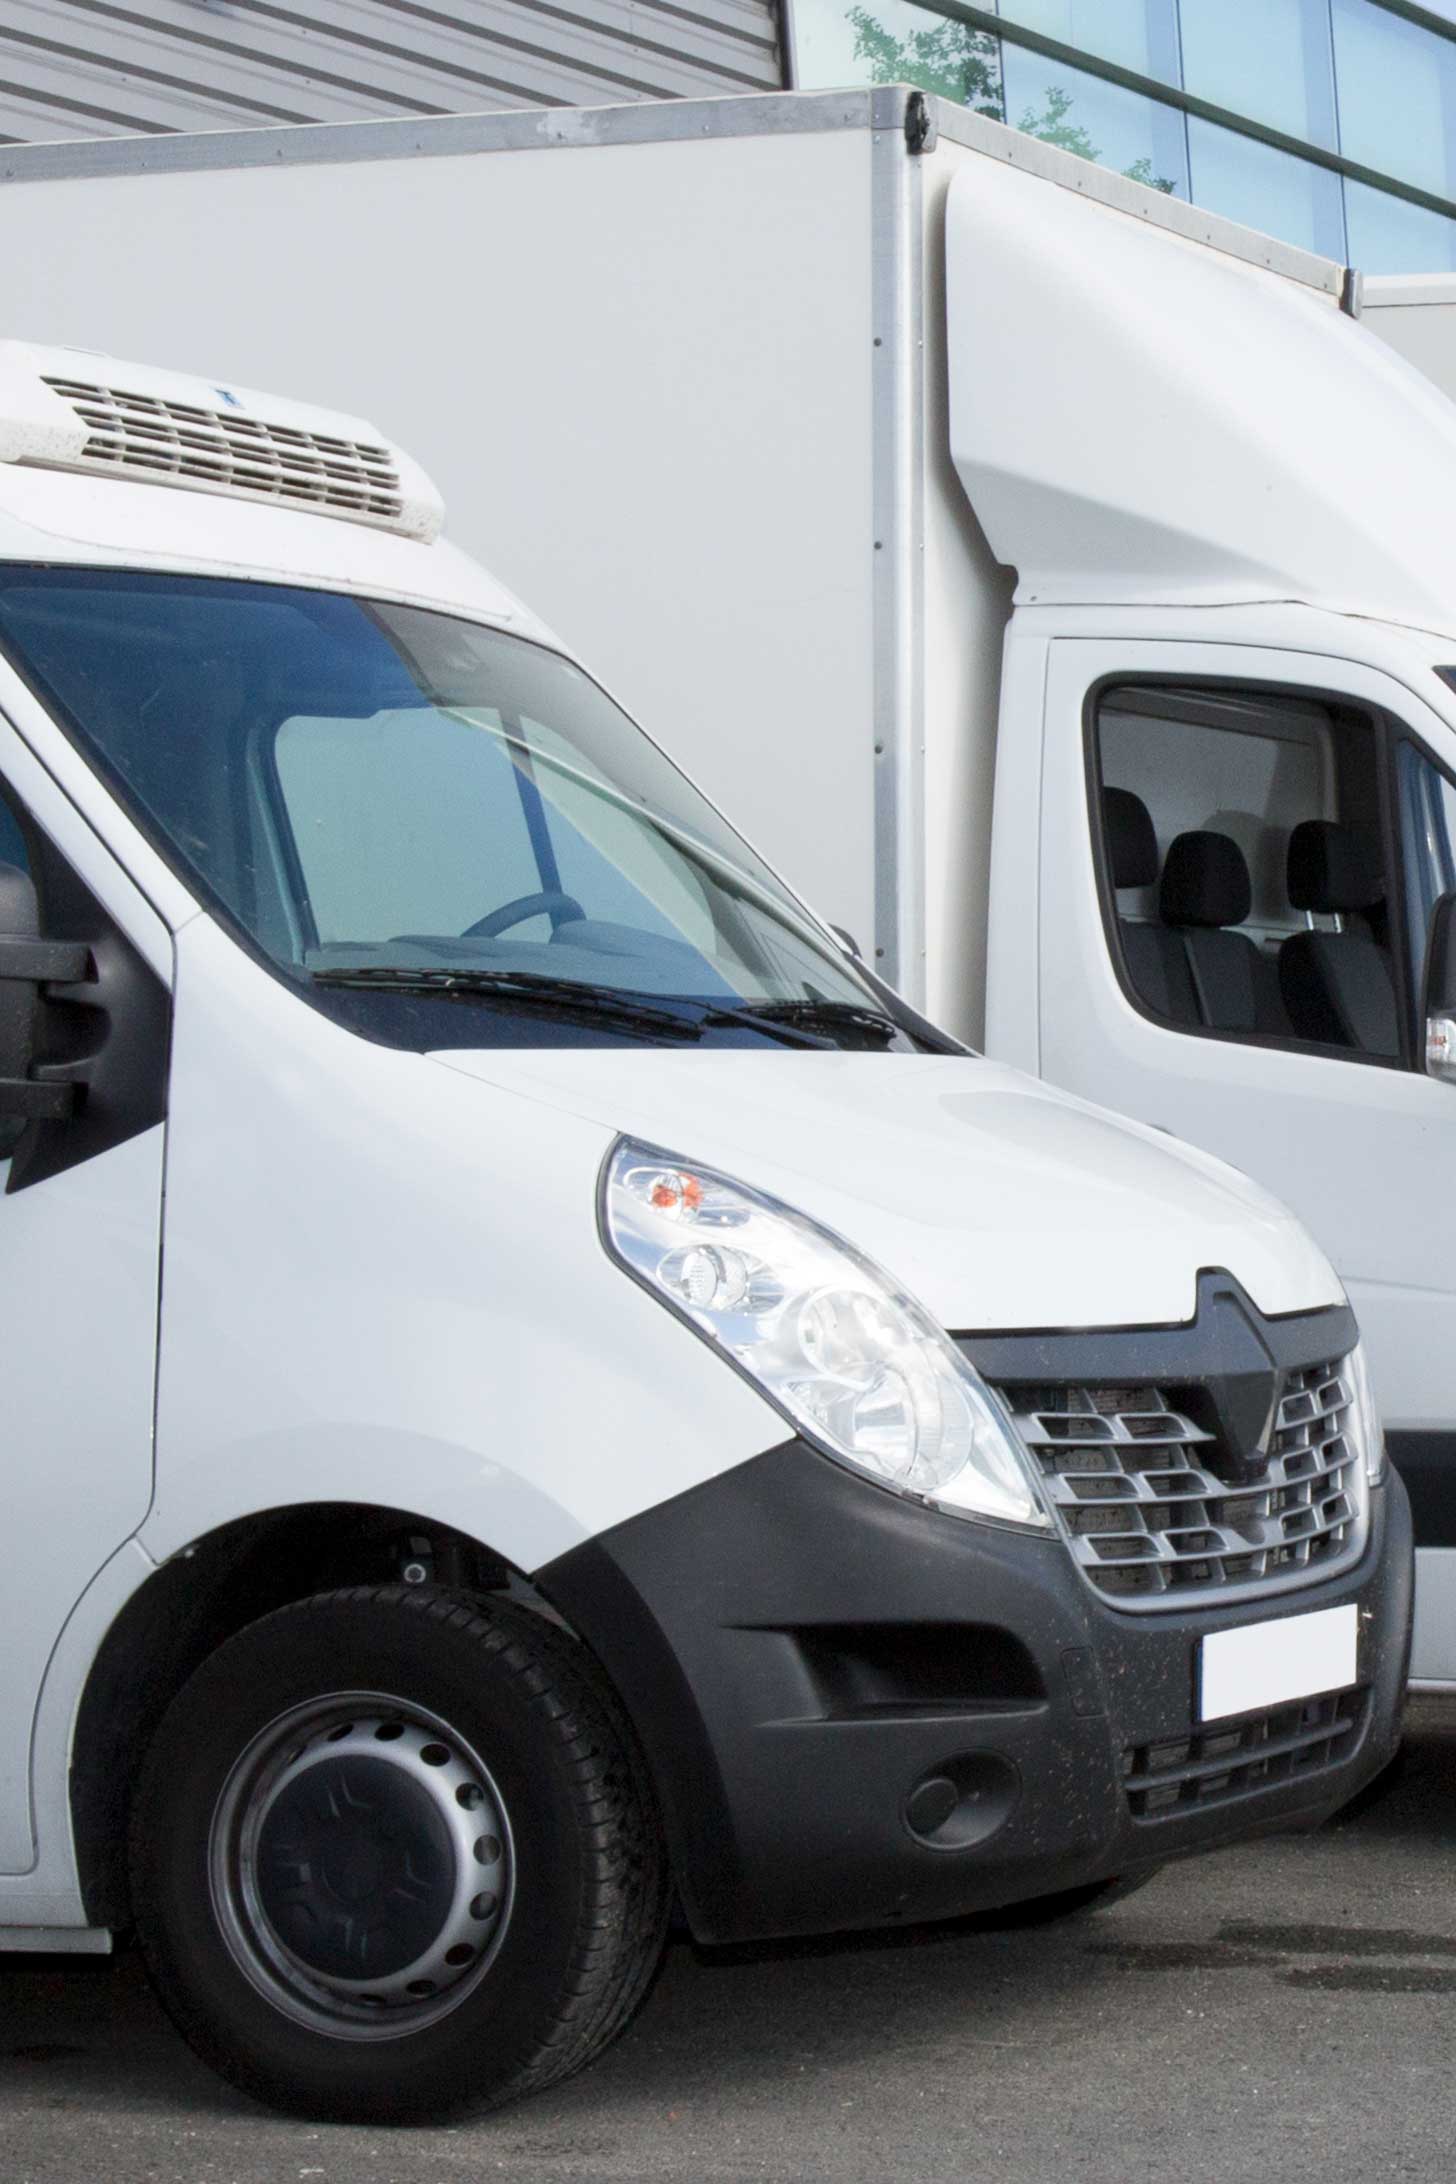 Looking for Commercial Vehicle Rental in Dublin?